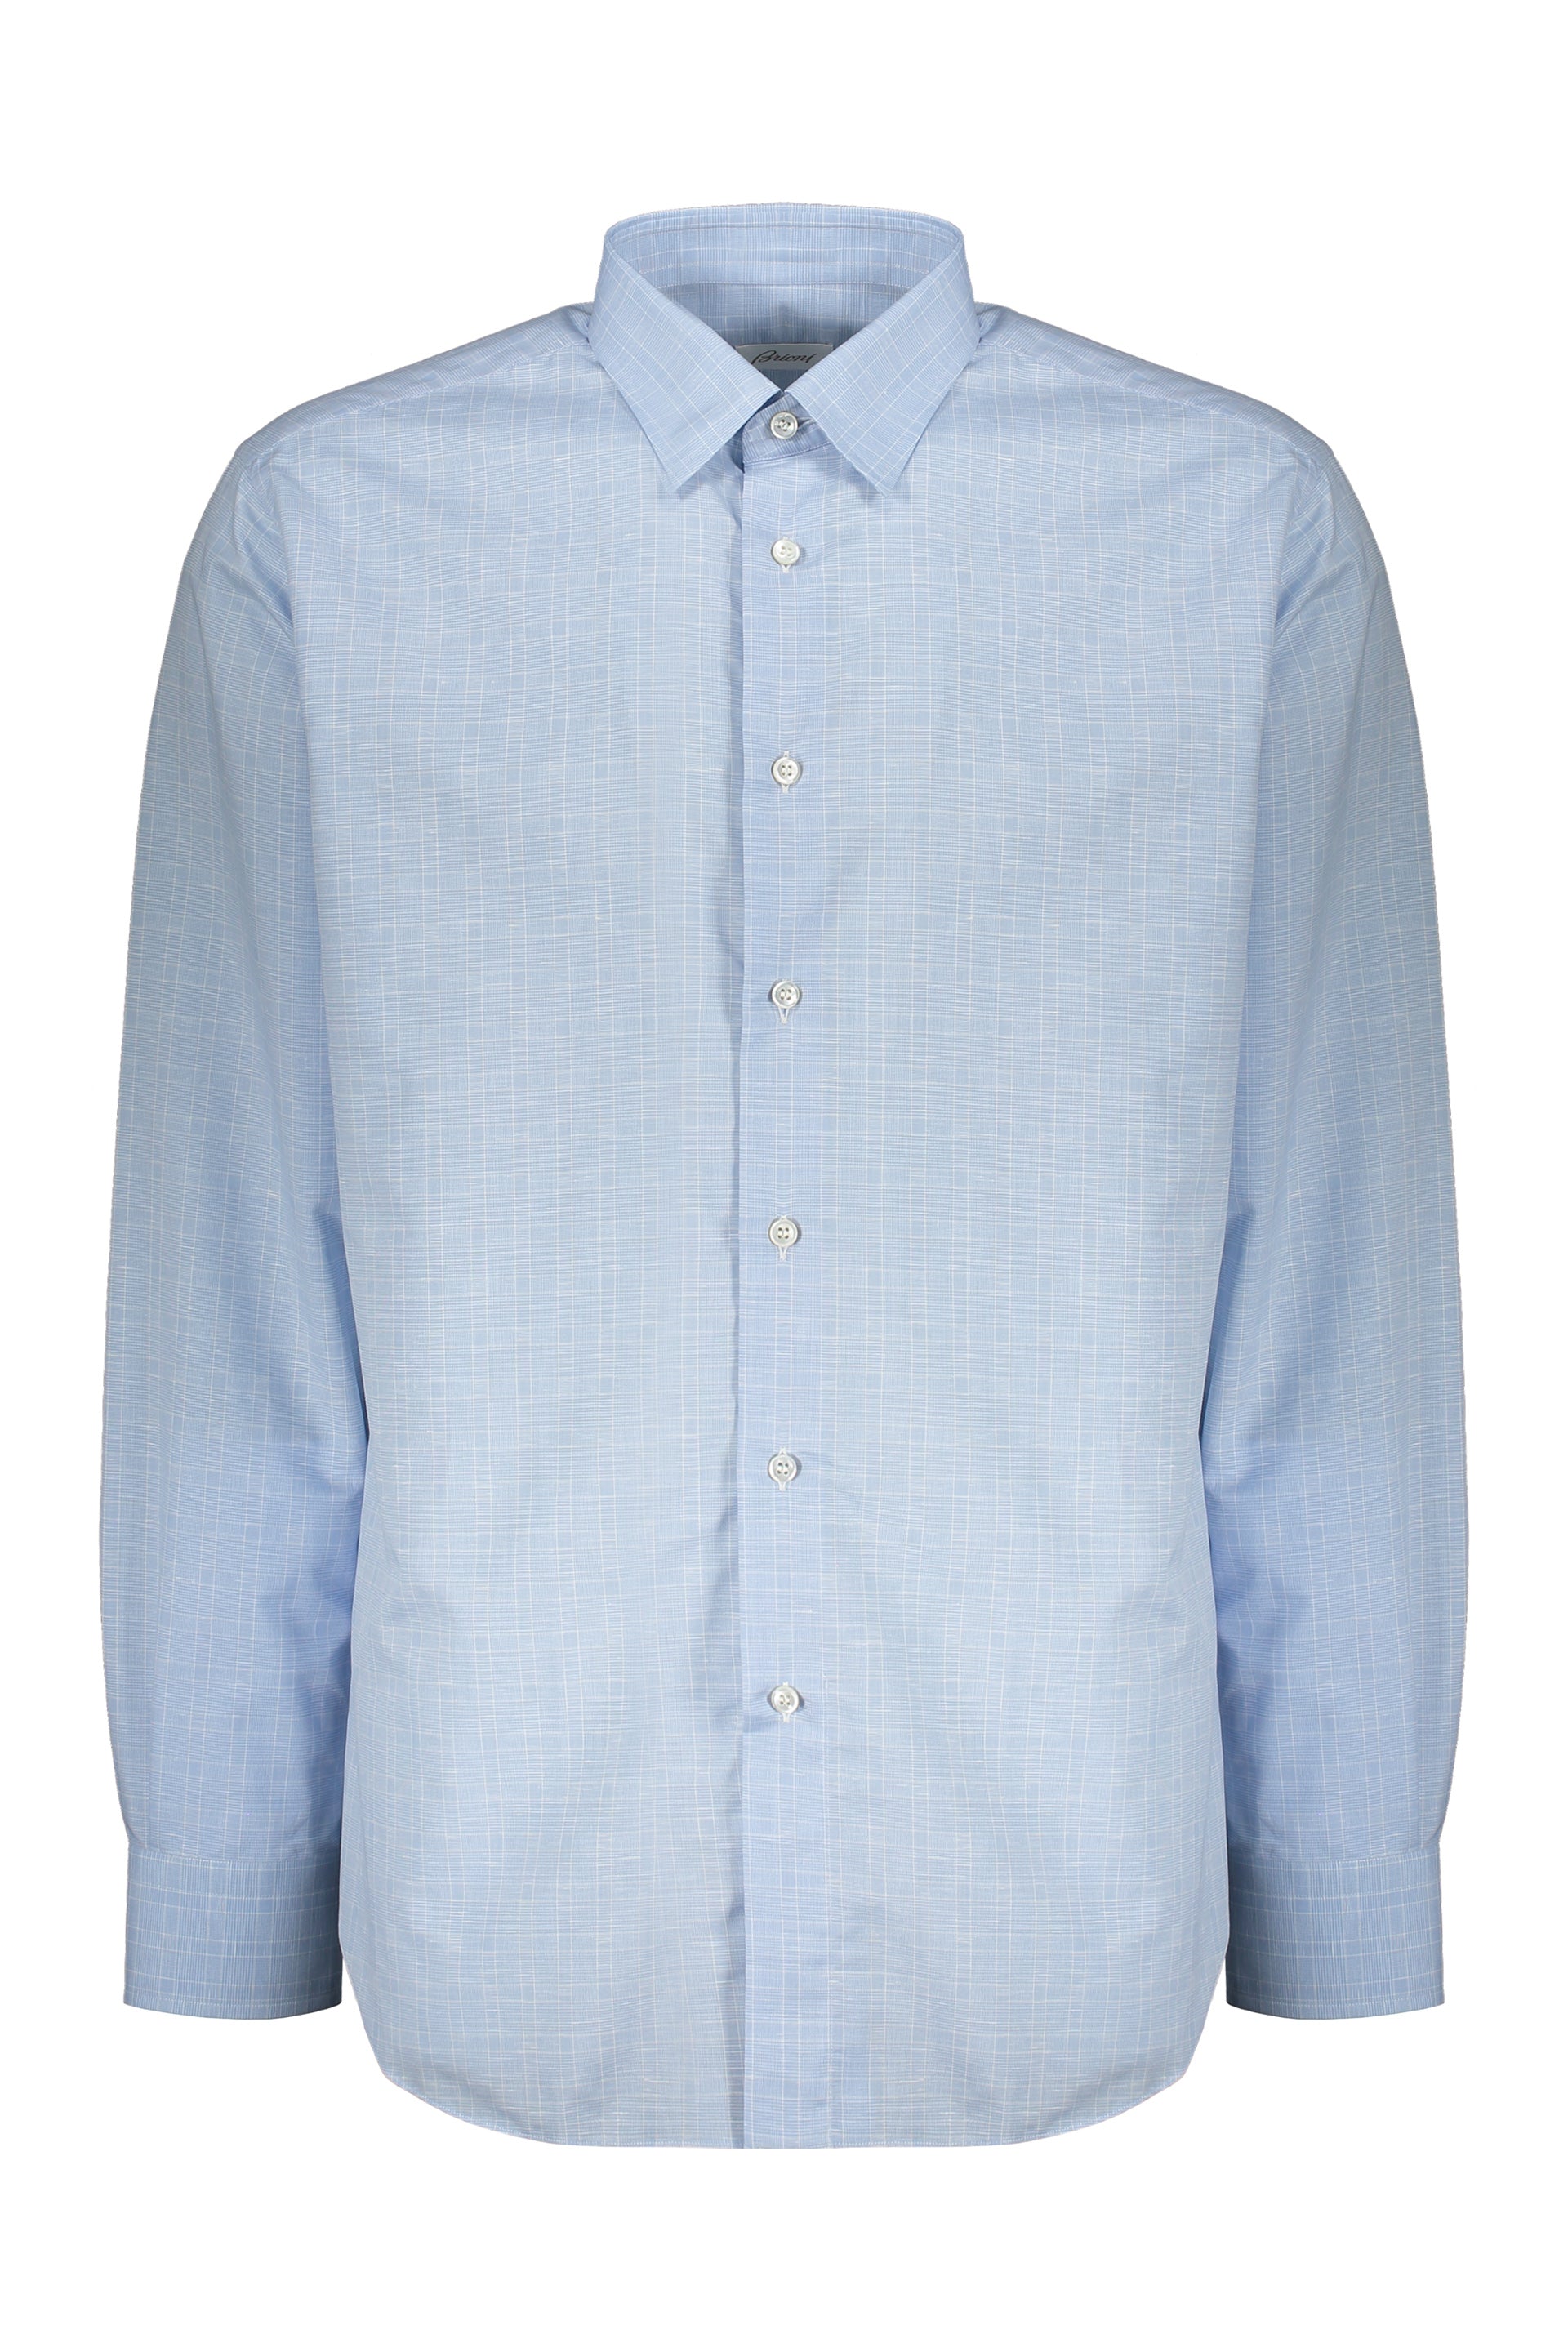 BRIONI-OUTLET-SALE-Checked-shirt-Shirts-XL-ARCHIVE-COLLECTION.jpg